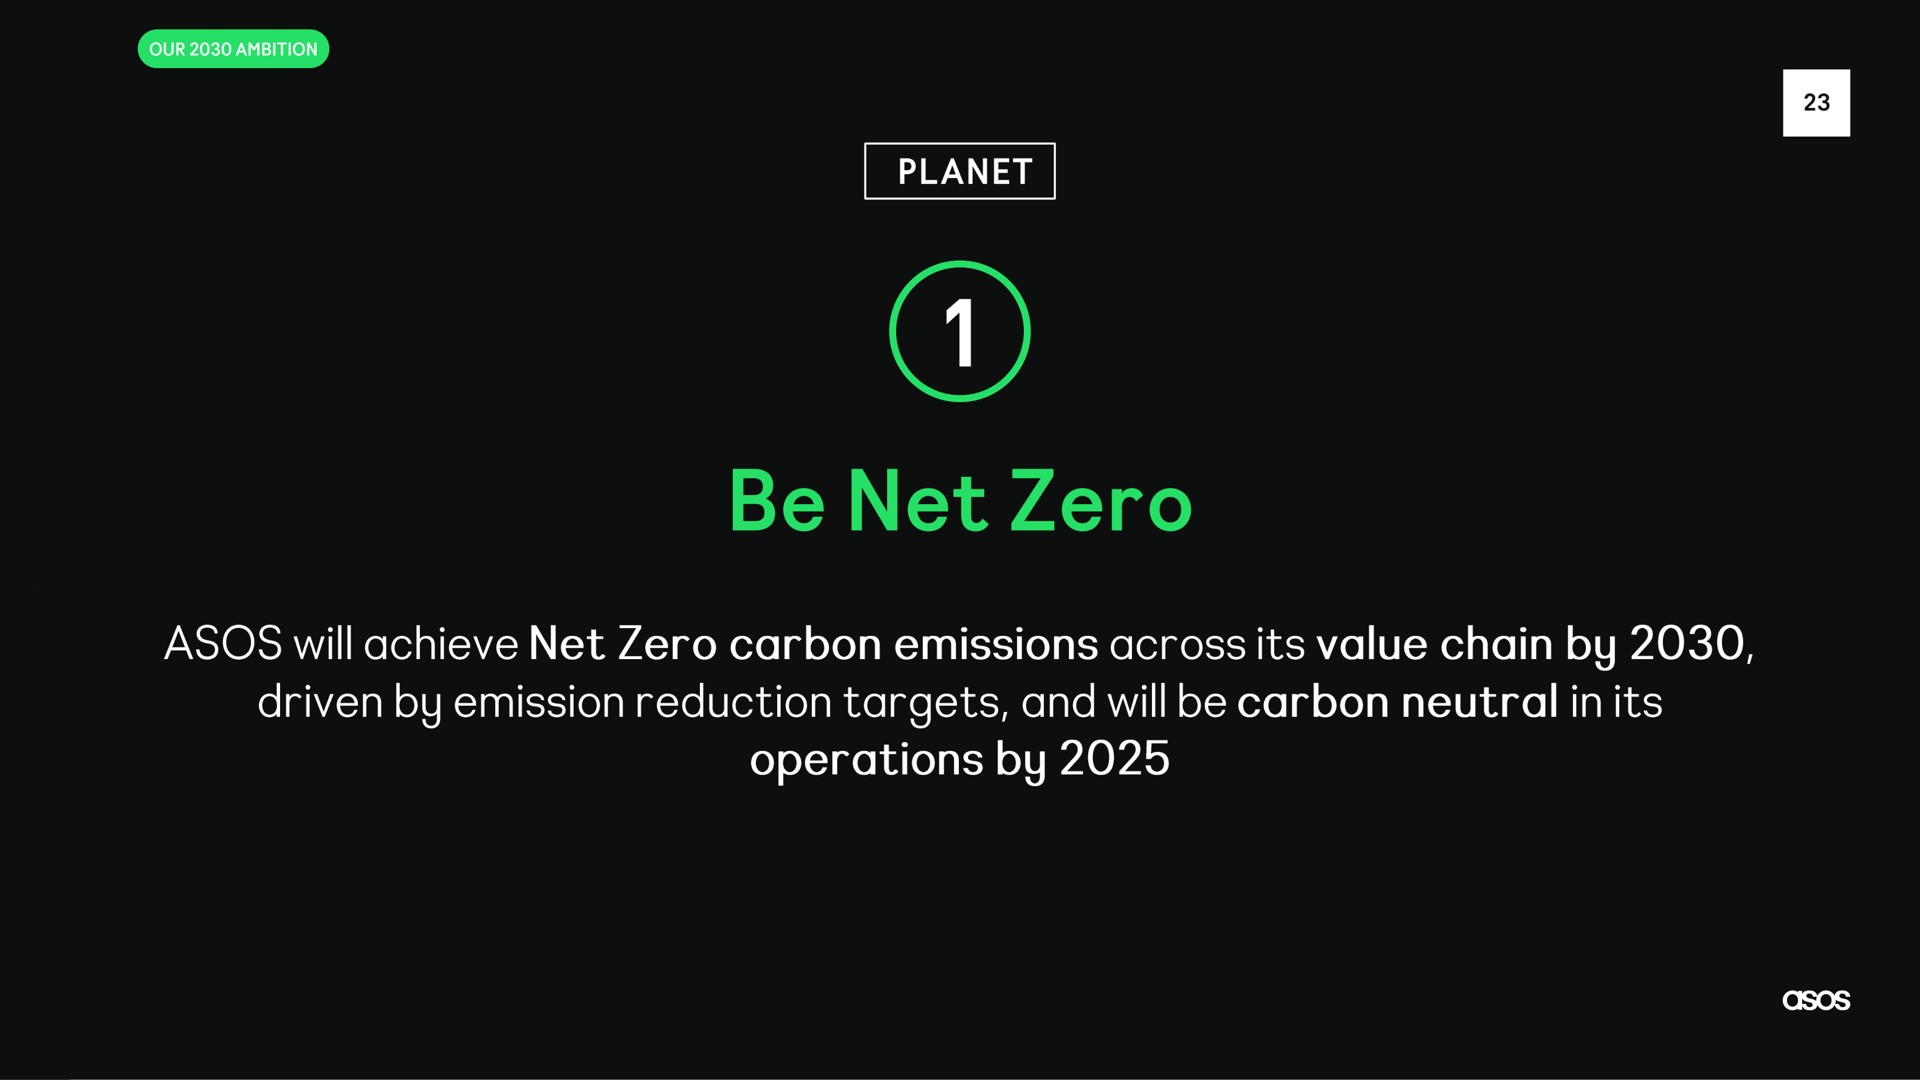 be net zero will achieve net zero carbon emissions across its value chain by driven by emission reduction targets and will be carbon neutral in its operations by | Asos